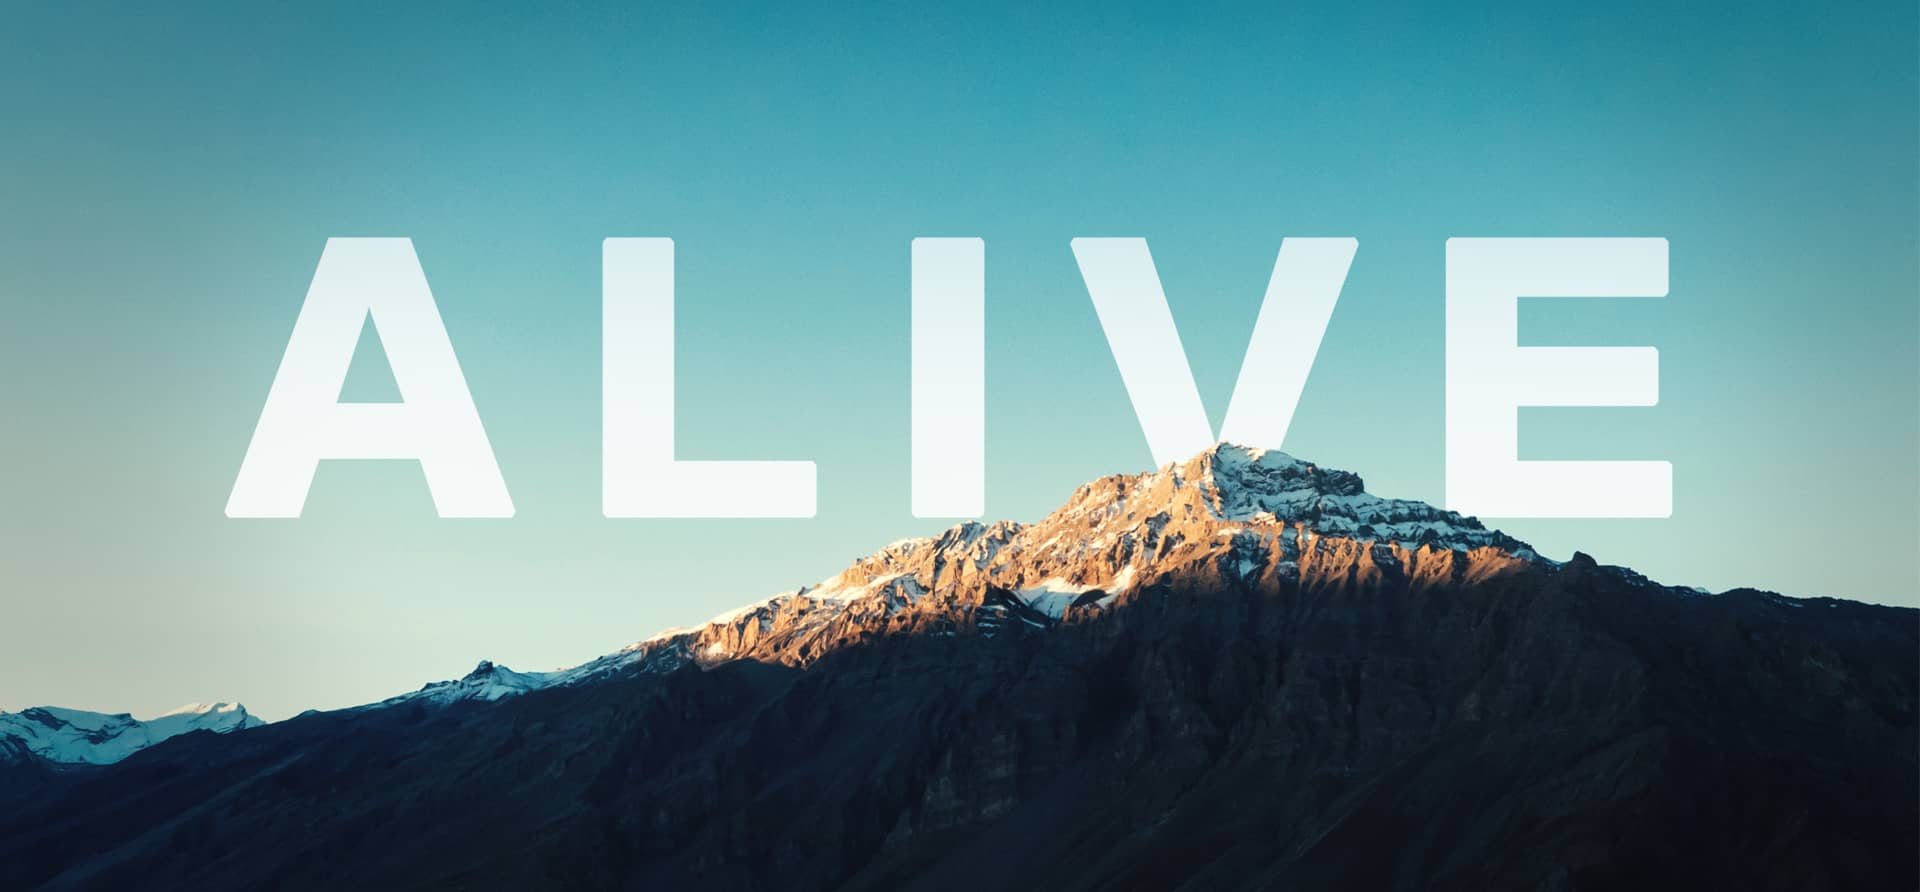 High Resolution Wallpaper | Alive 1920x892 px